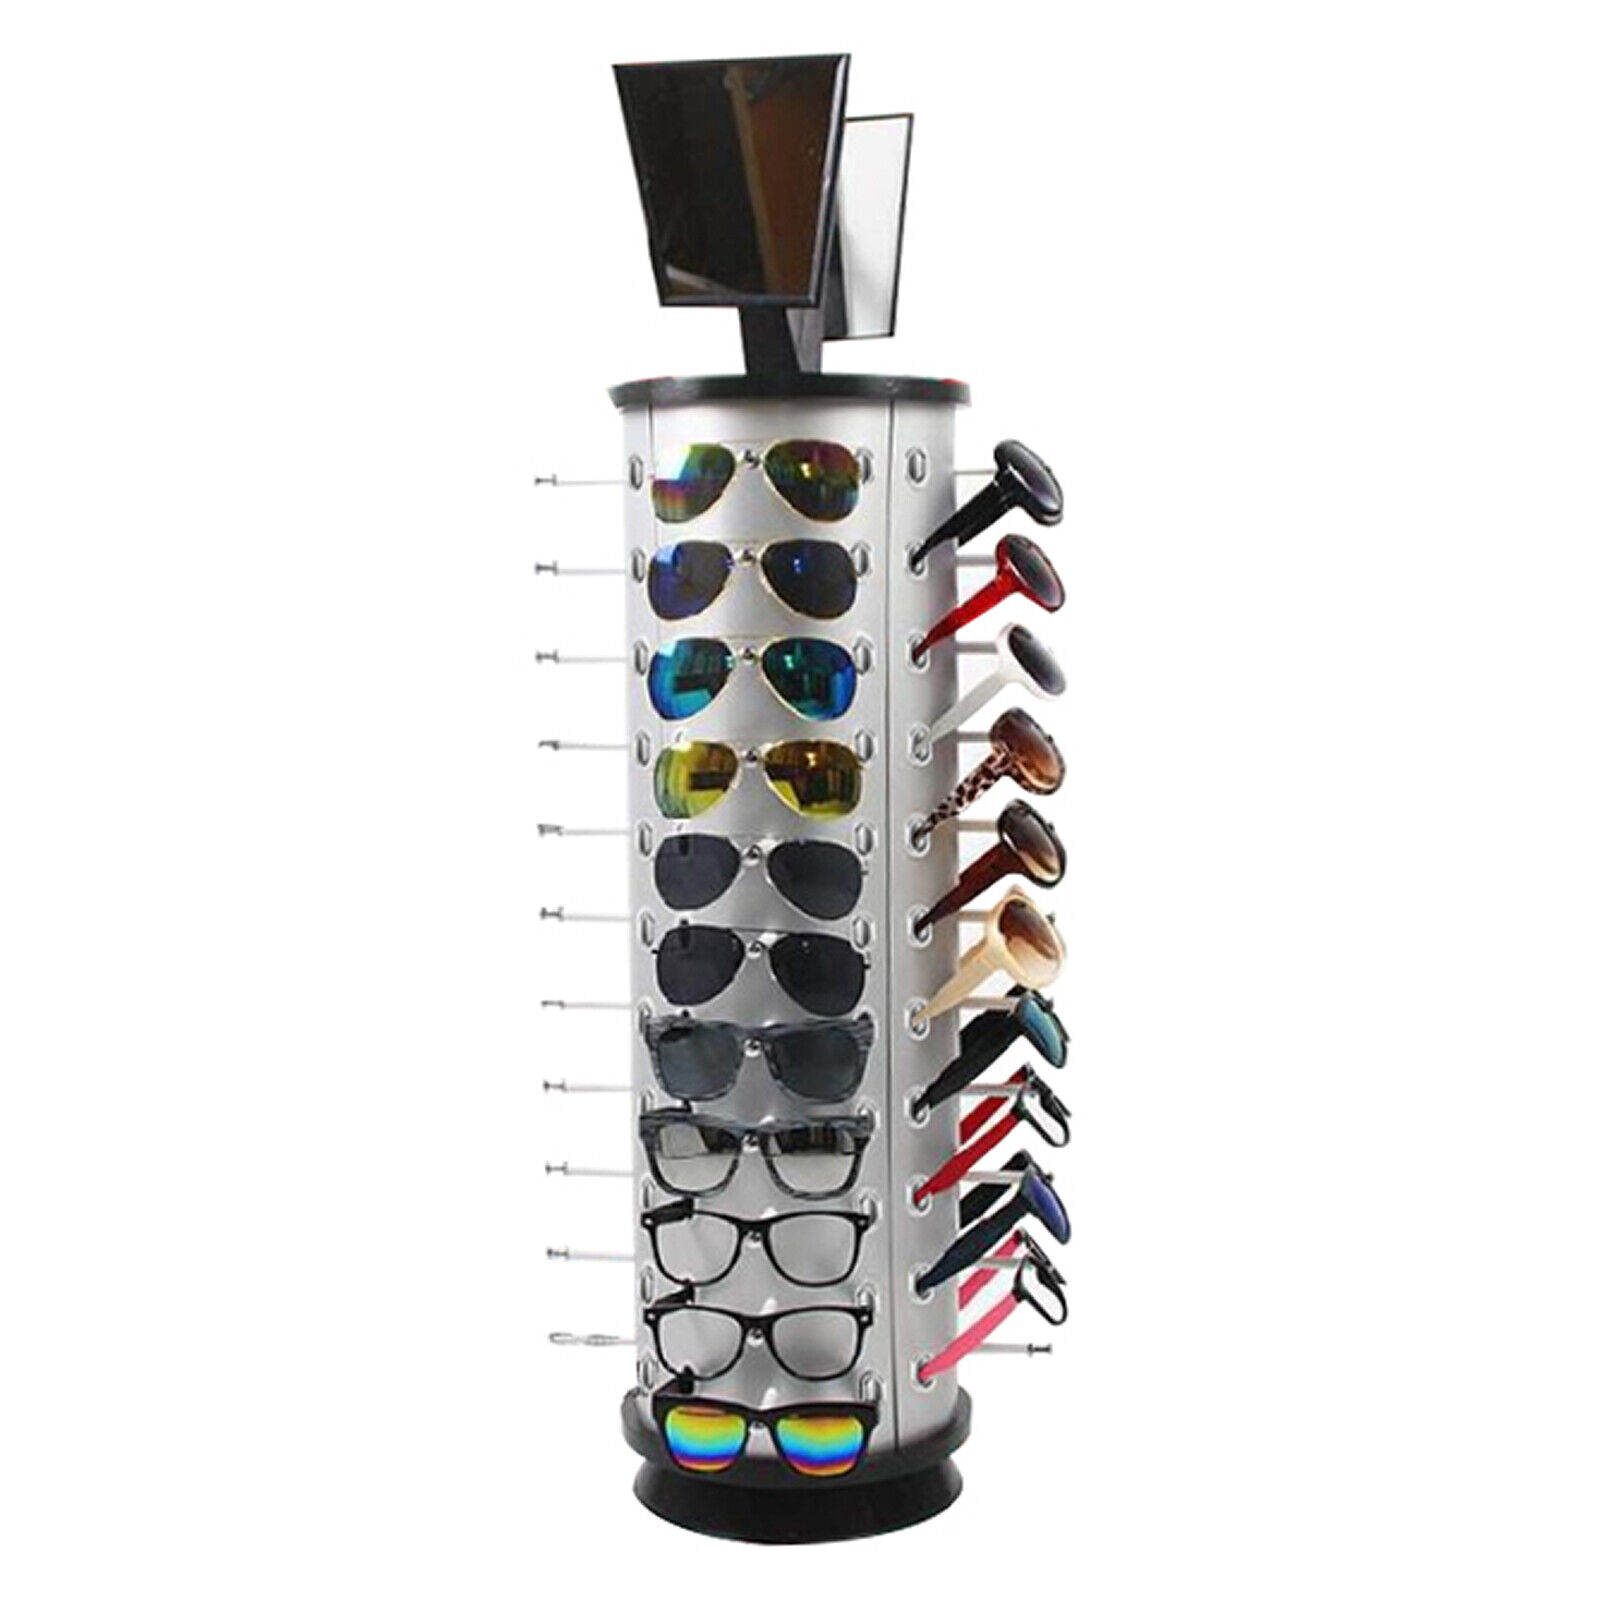 44 Pair Sunglasses Display 360° Rotating Rack Glasses Holder Stand  w/ Mirror Unbranded Does Not Apply - фотография #4